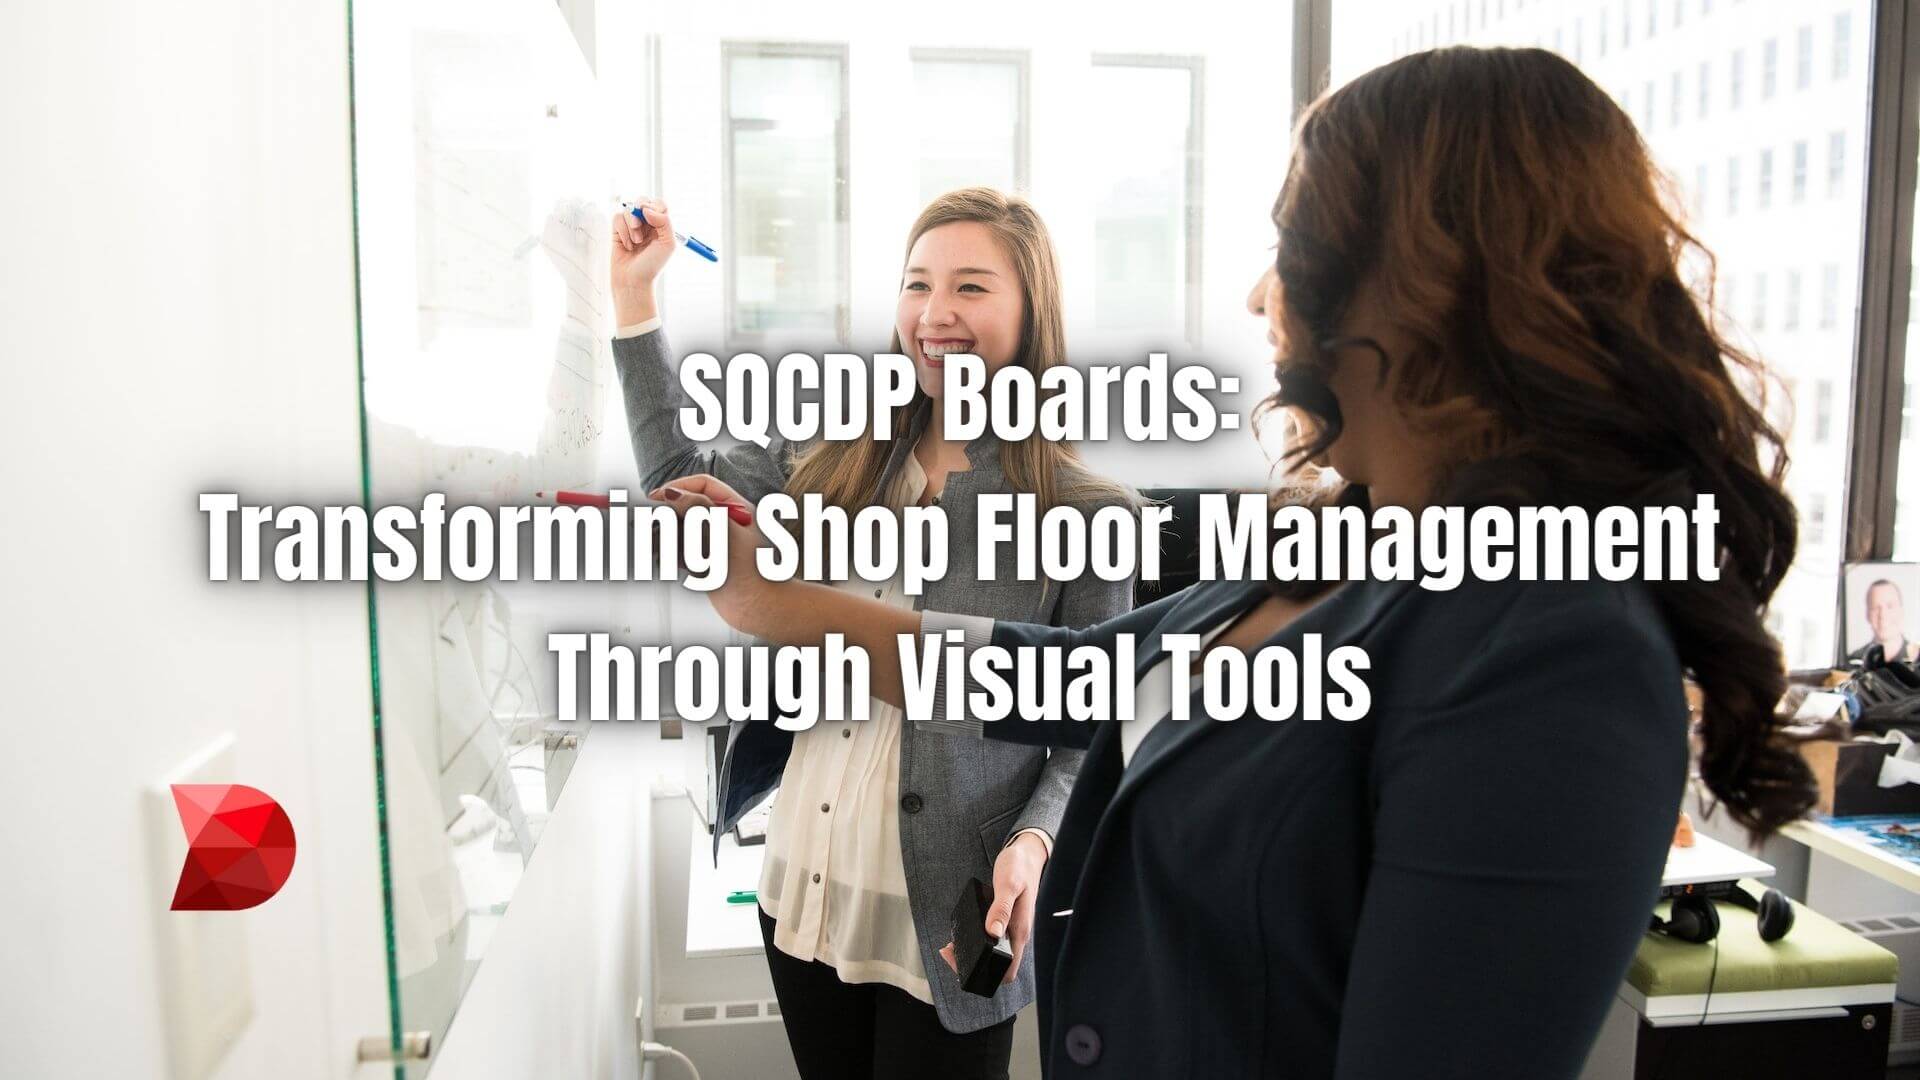 In the manufacturing industry, the SQCDP board is a guide towards enhanced efficiency, productivity, and engagement. Learn more!